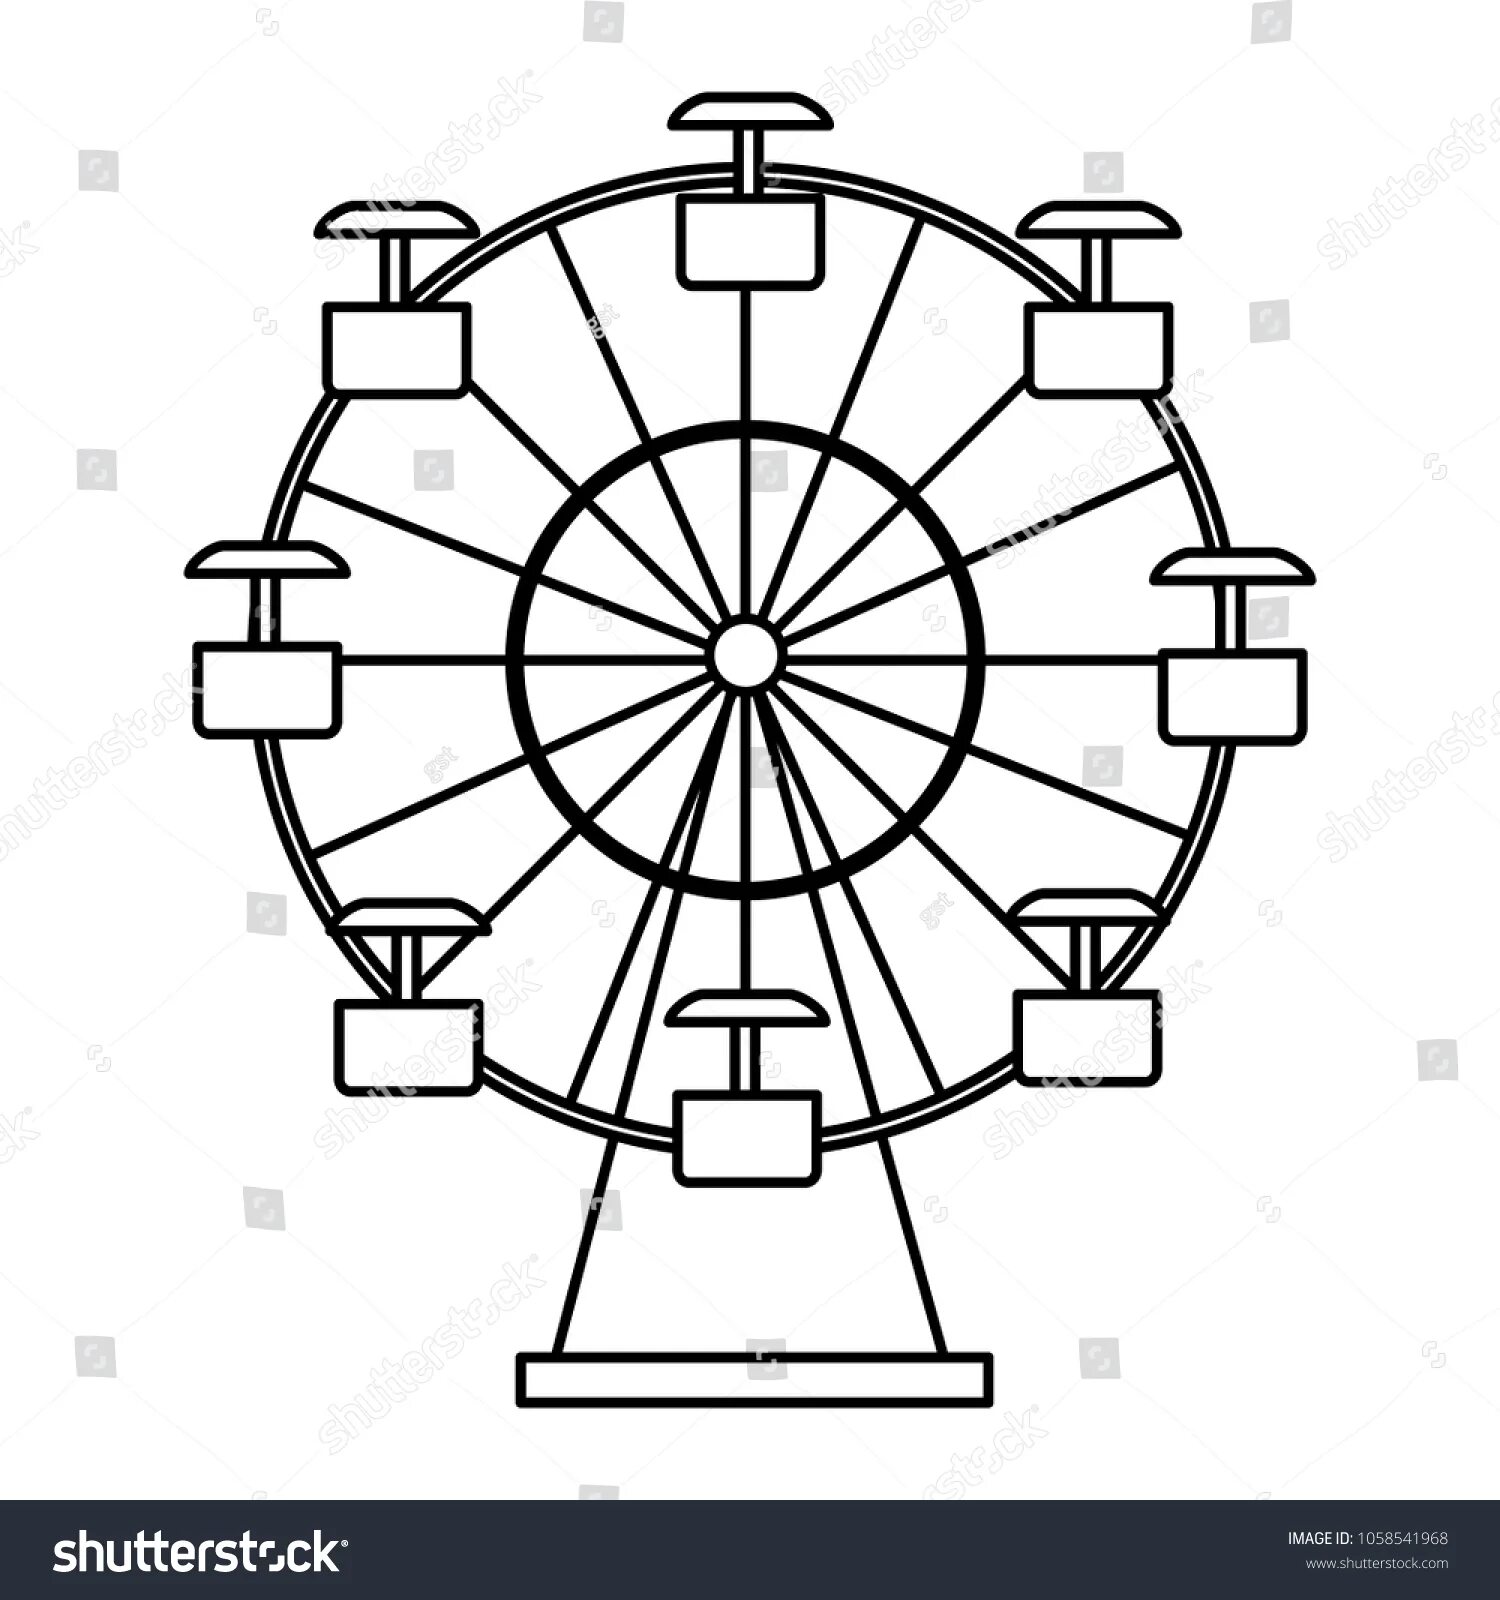 Live ferris wheel coloring page for kids